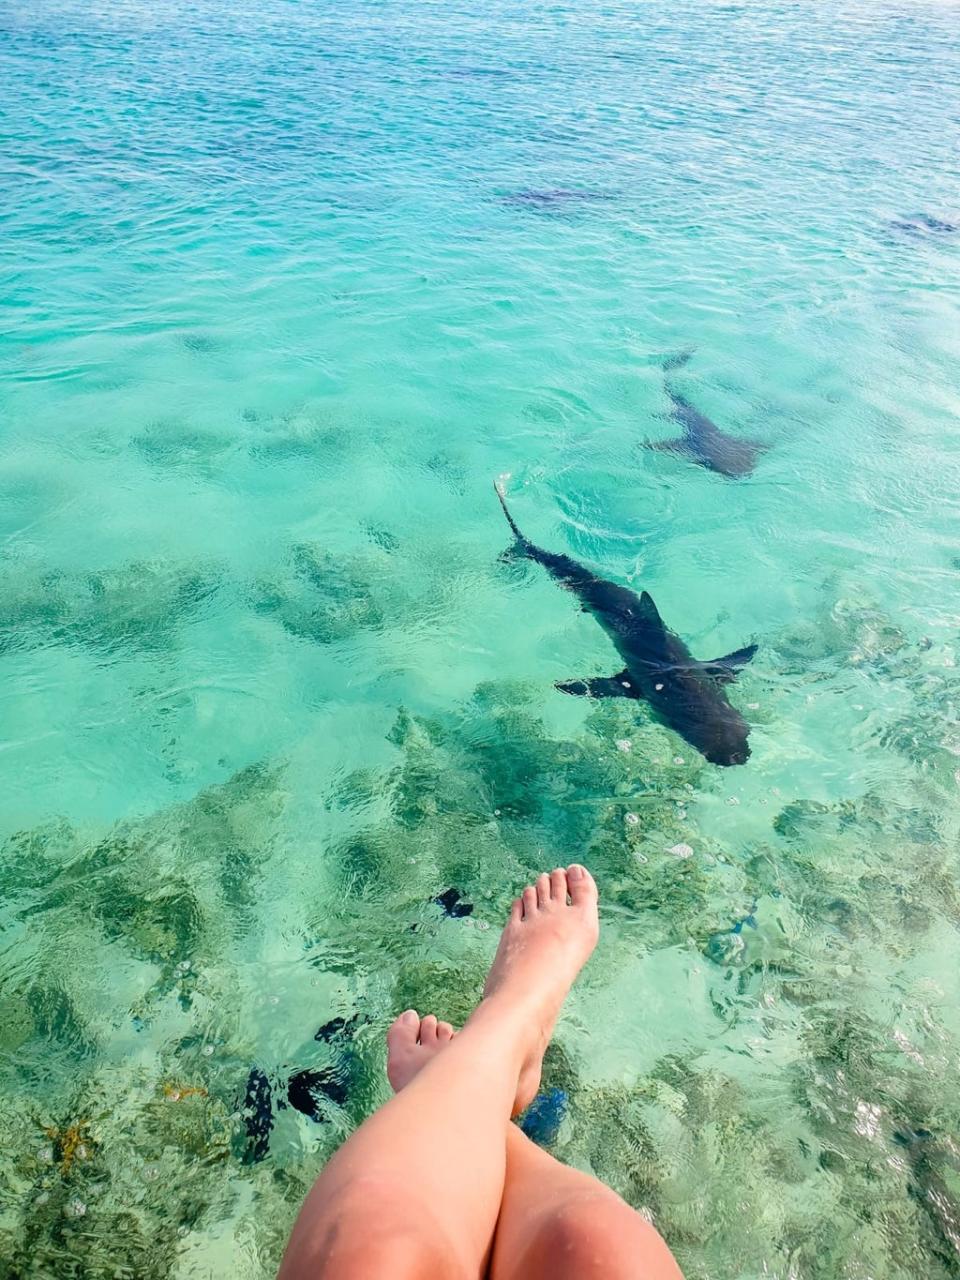 Swimming with sharks in turquoise Bahamian waters (Alexandra Riemann)